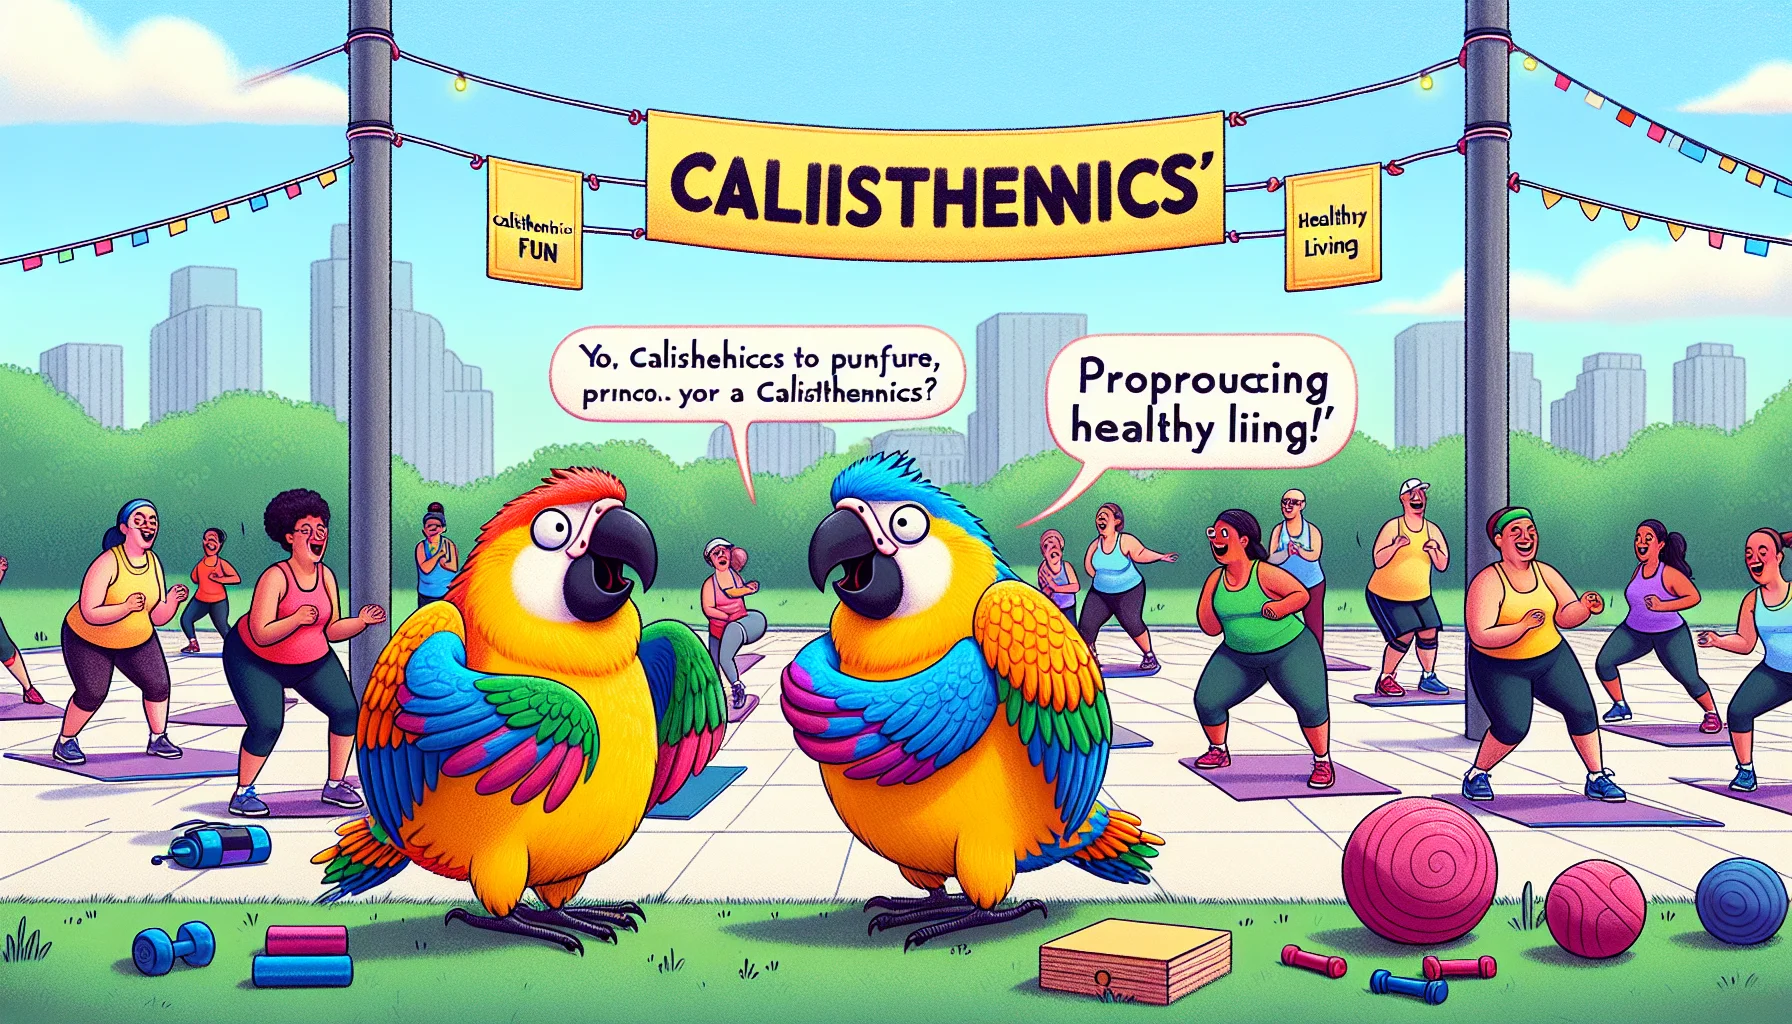 An amusing scenario highlighting the pronunciation of the word 'calisthenics'. Picture a cartoon style set in an outdoor park where two plump parrots are struggling to pronounce 'calisthenics' while attempting to follow an exercise routine led by a Hispanic woman. The parrots in brightly colored feather outfits are humorously mispronouncing the word causing a fit of laughter amongst the diverse group of park people exercising with them. There are motivational banners around them saying 'calisthenics is fun' and 'healthy living'. Overall this scene aims to encourage people to engage in exercise in a light-hearted manner.